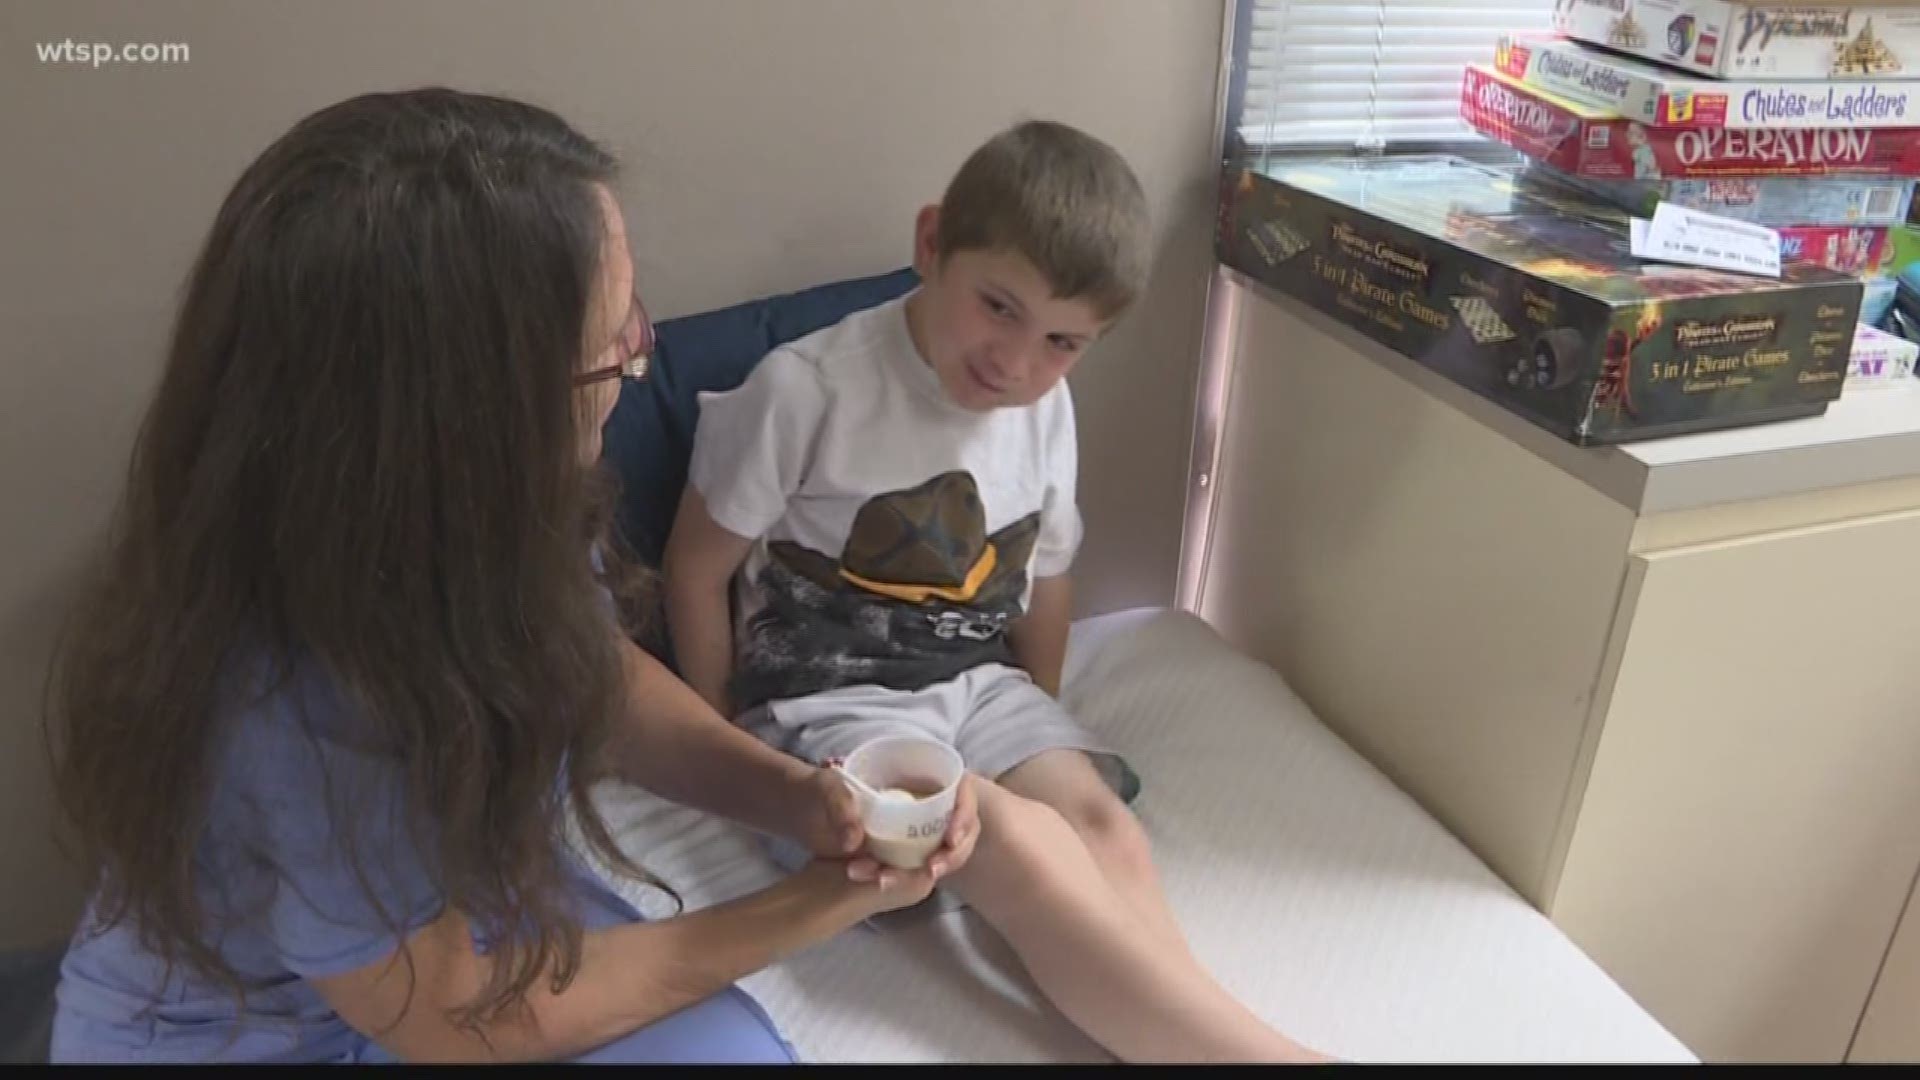 You really can't go anywhere without seeing a warning about peanuts.

You probably know someone who is allergic.

Right now, the University of South Florida is conducting a breakthrough study for children with peanut allergies in the hopes it will save kids from accidental exposure.

The treatment is now one step closer to FDA approval.